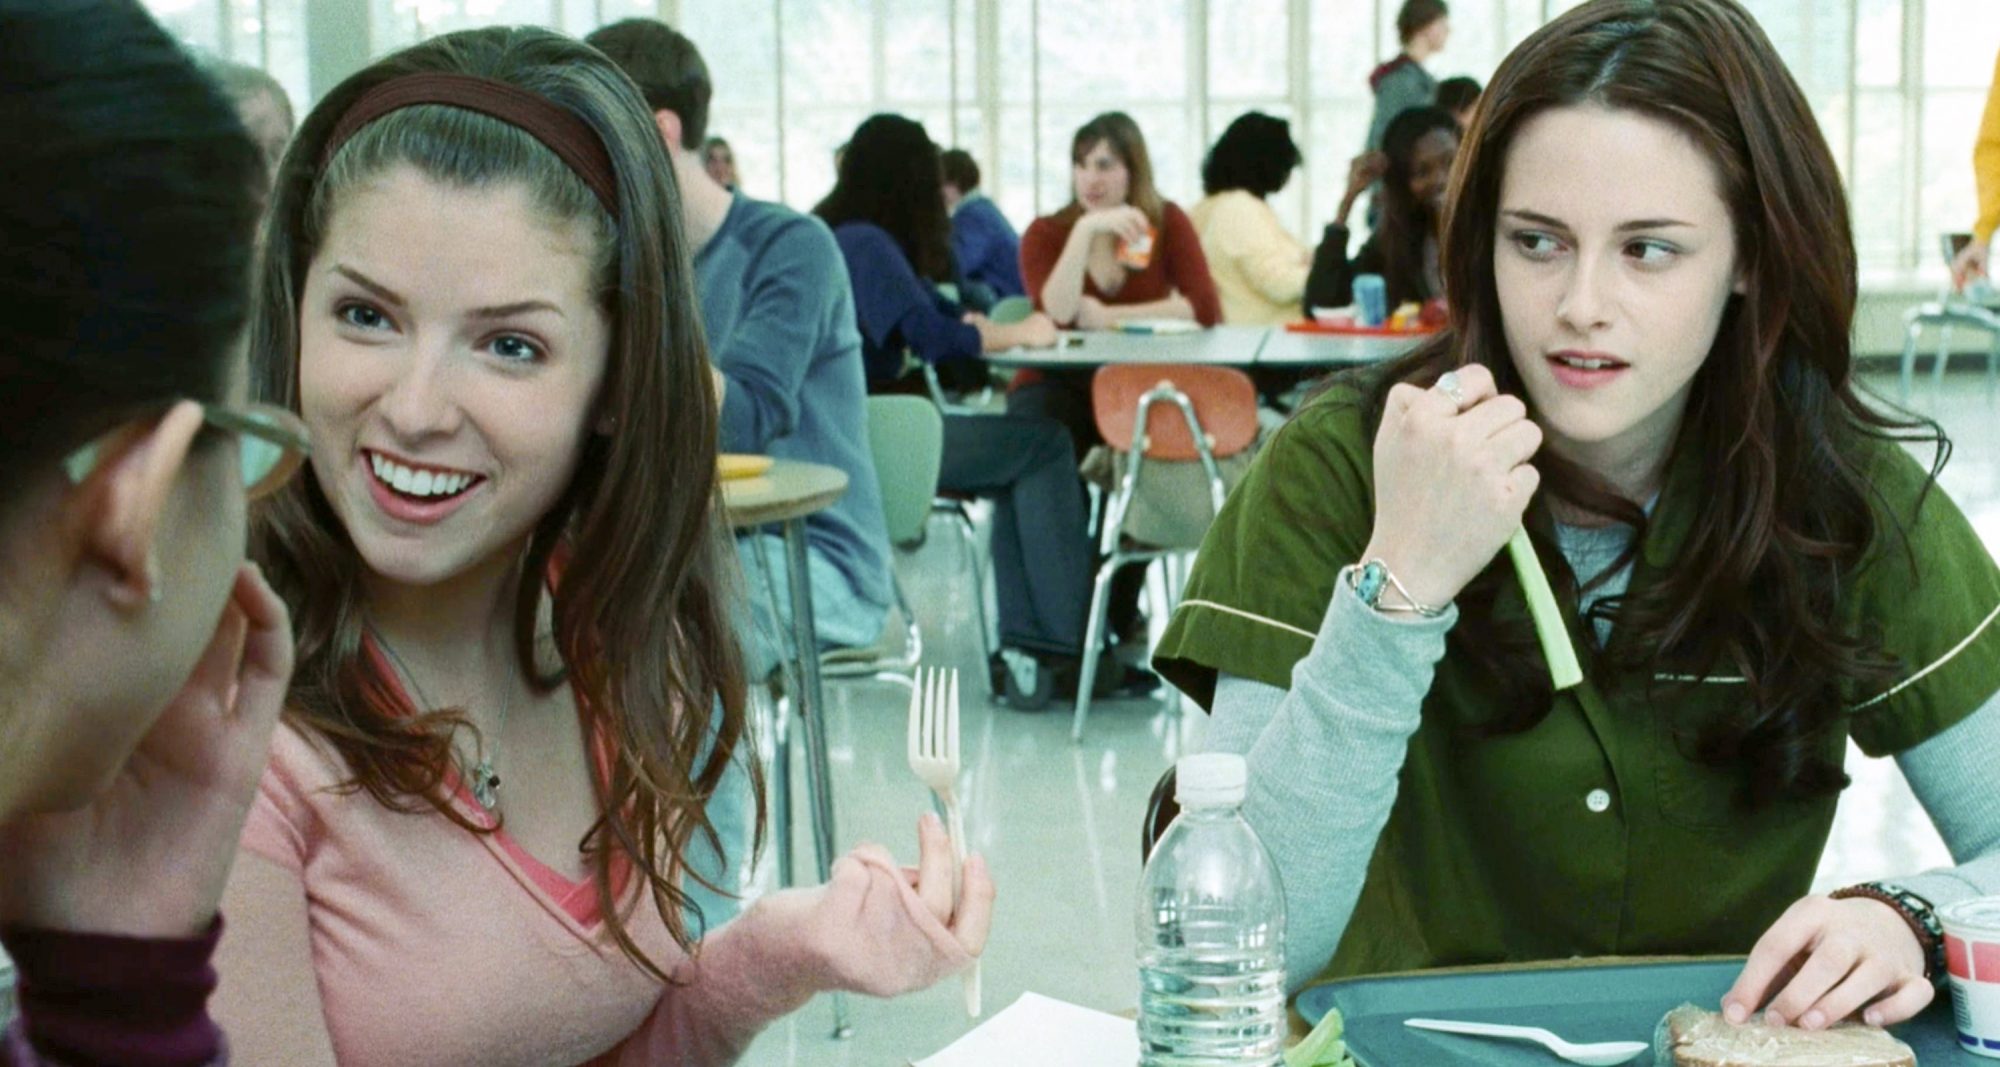 Bella Swan sitting in the cafeteria looking at her friend, Jessica Stanley. 